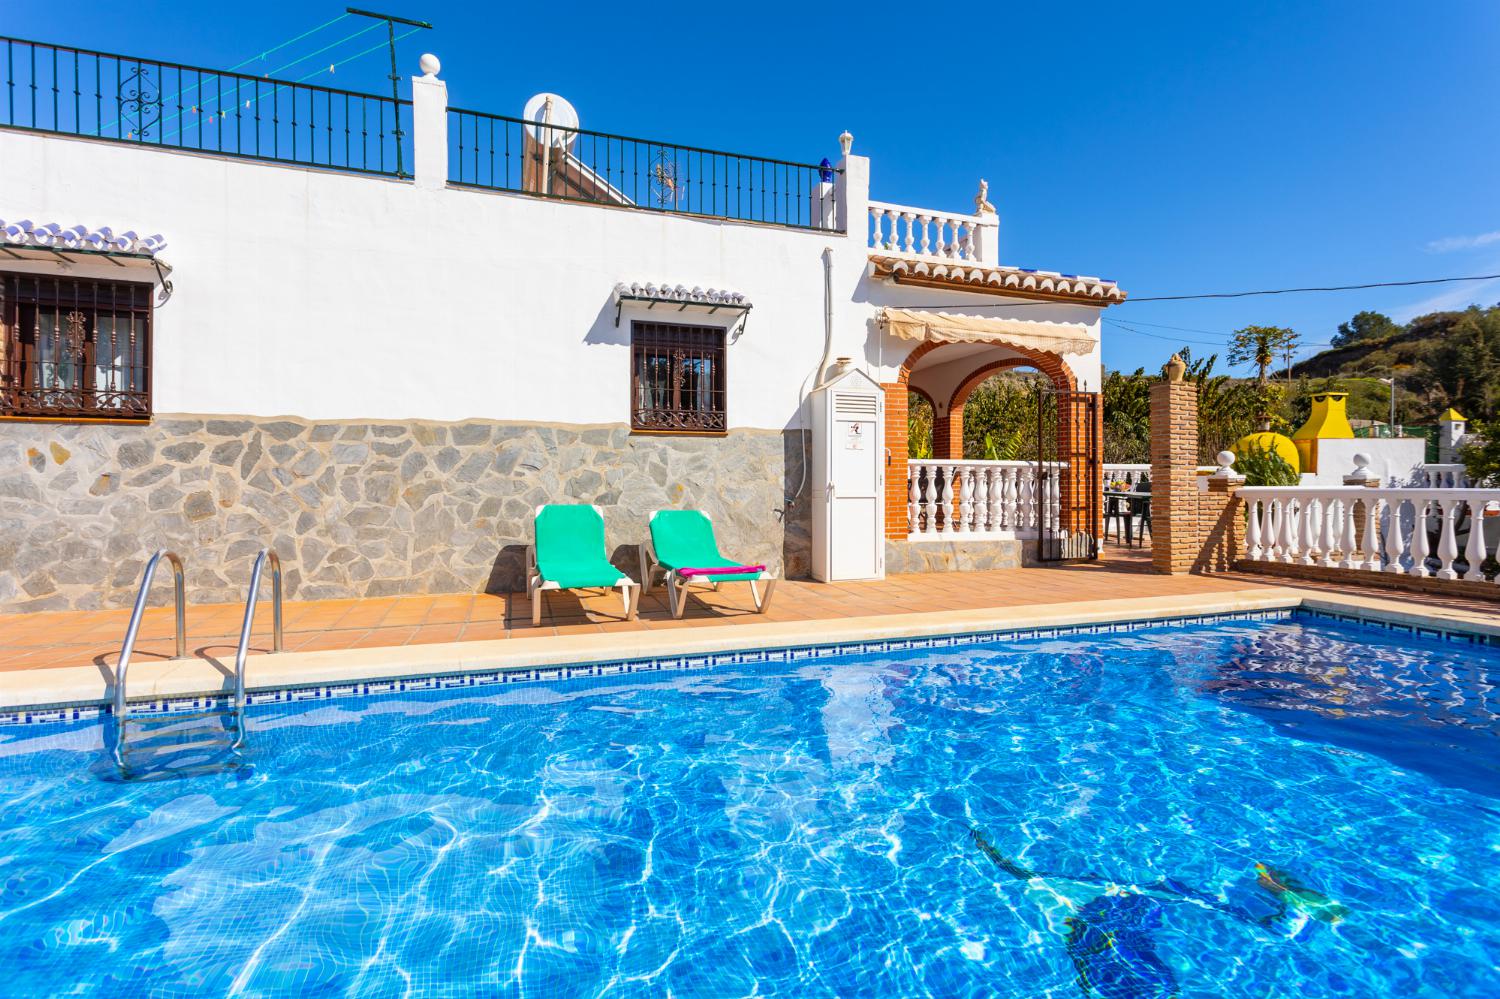 Beautiful villa with private pool, terrace, and garden